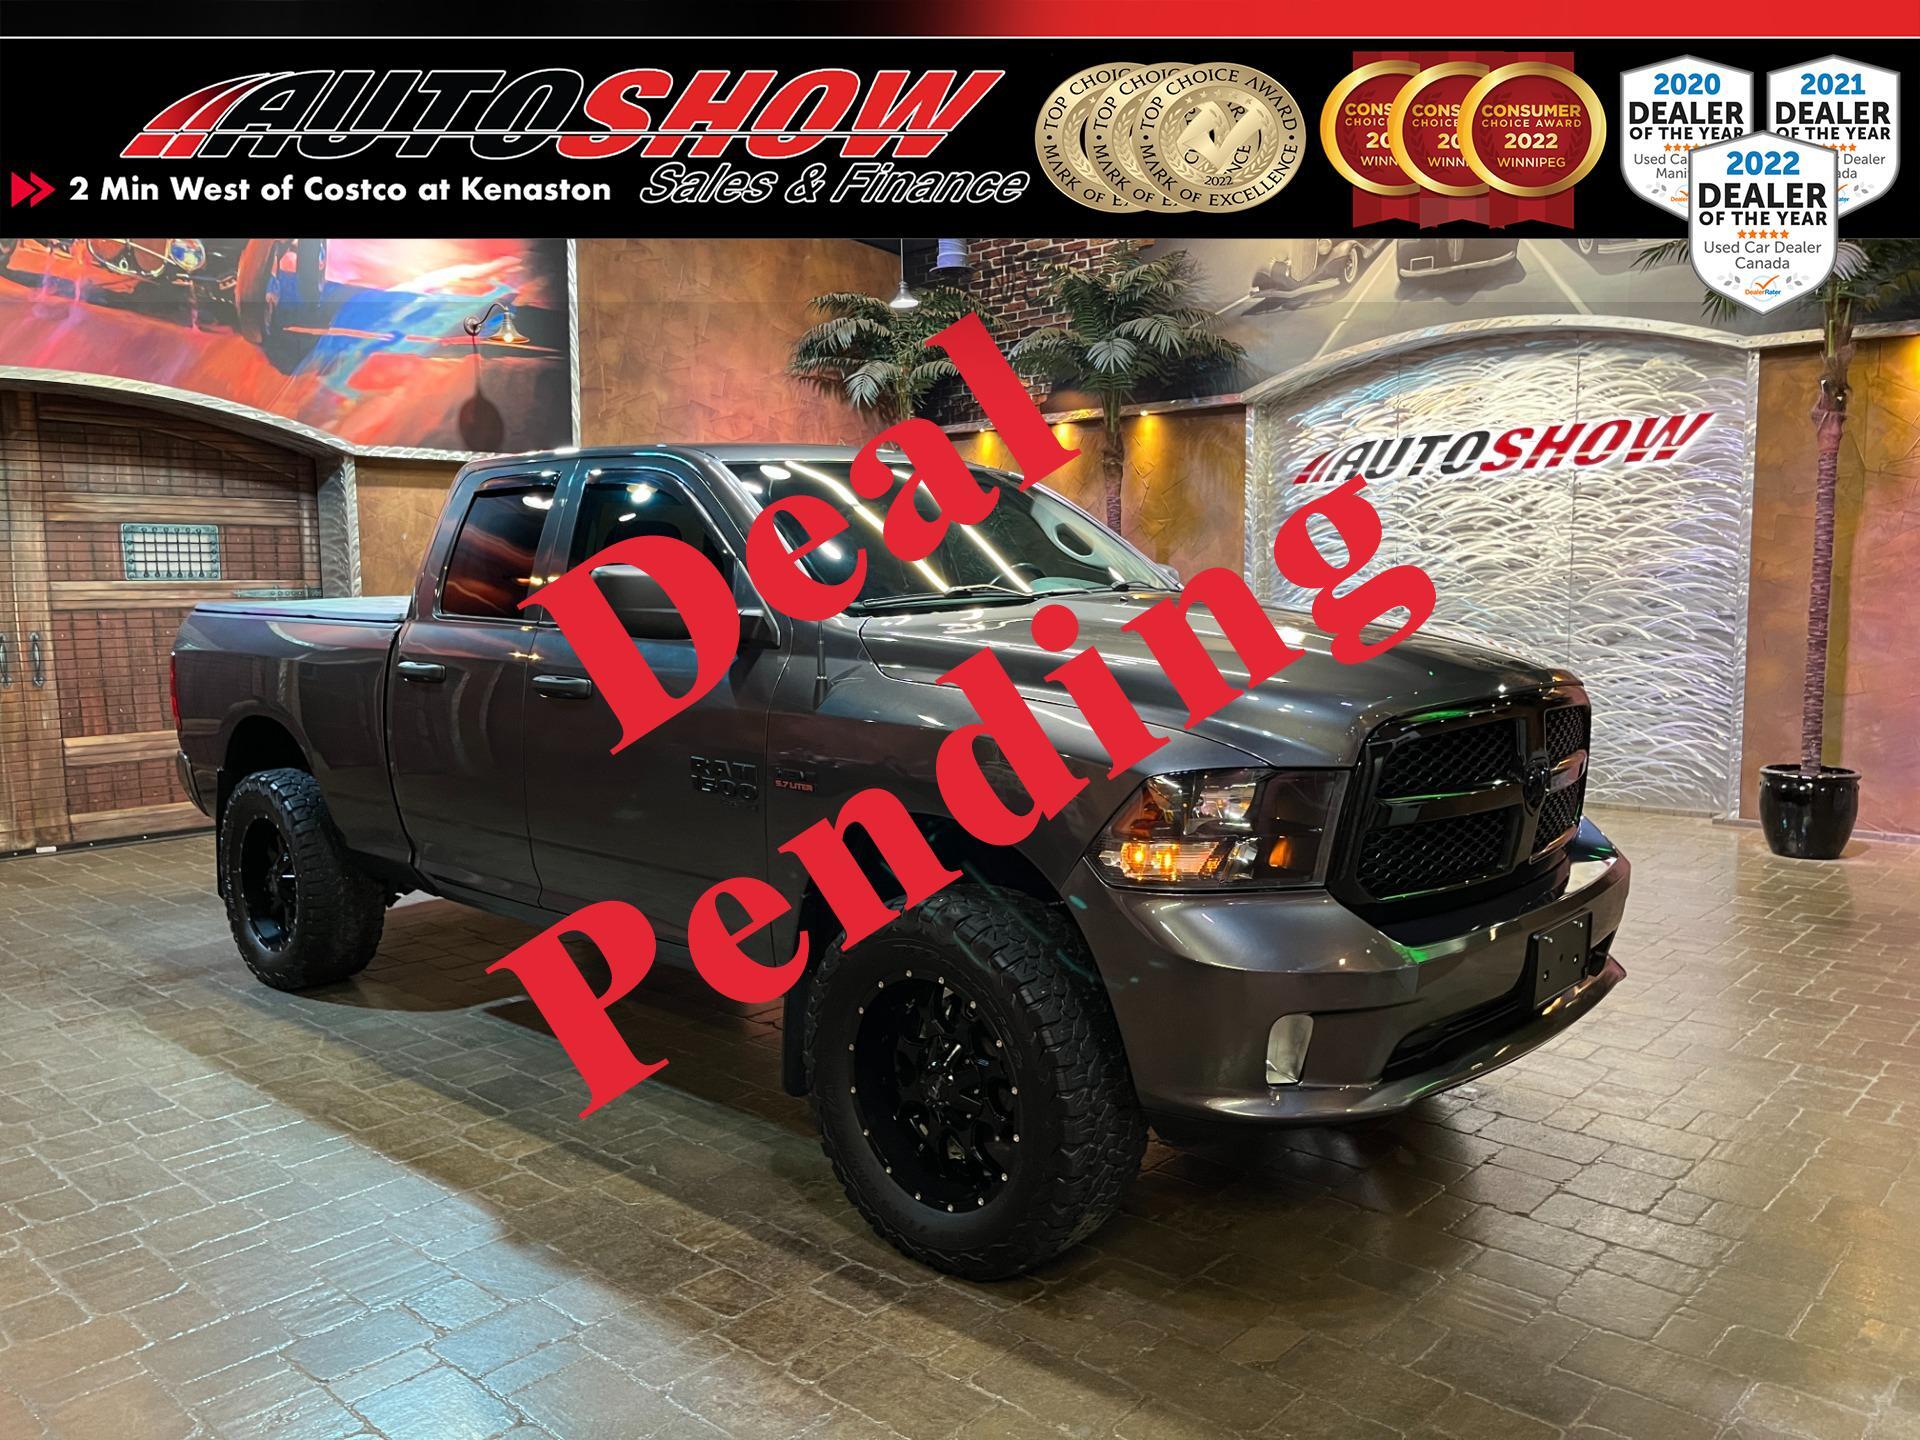 2021 Ram 1500 Lifted Night Edition - 35in KO2s, Htd Seats & Whee